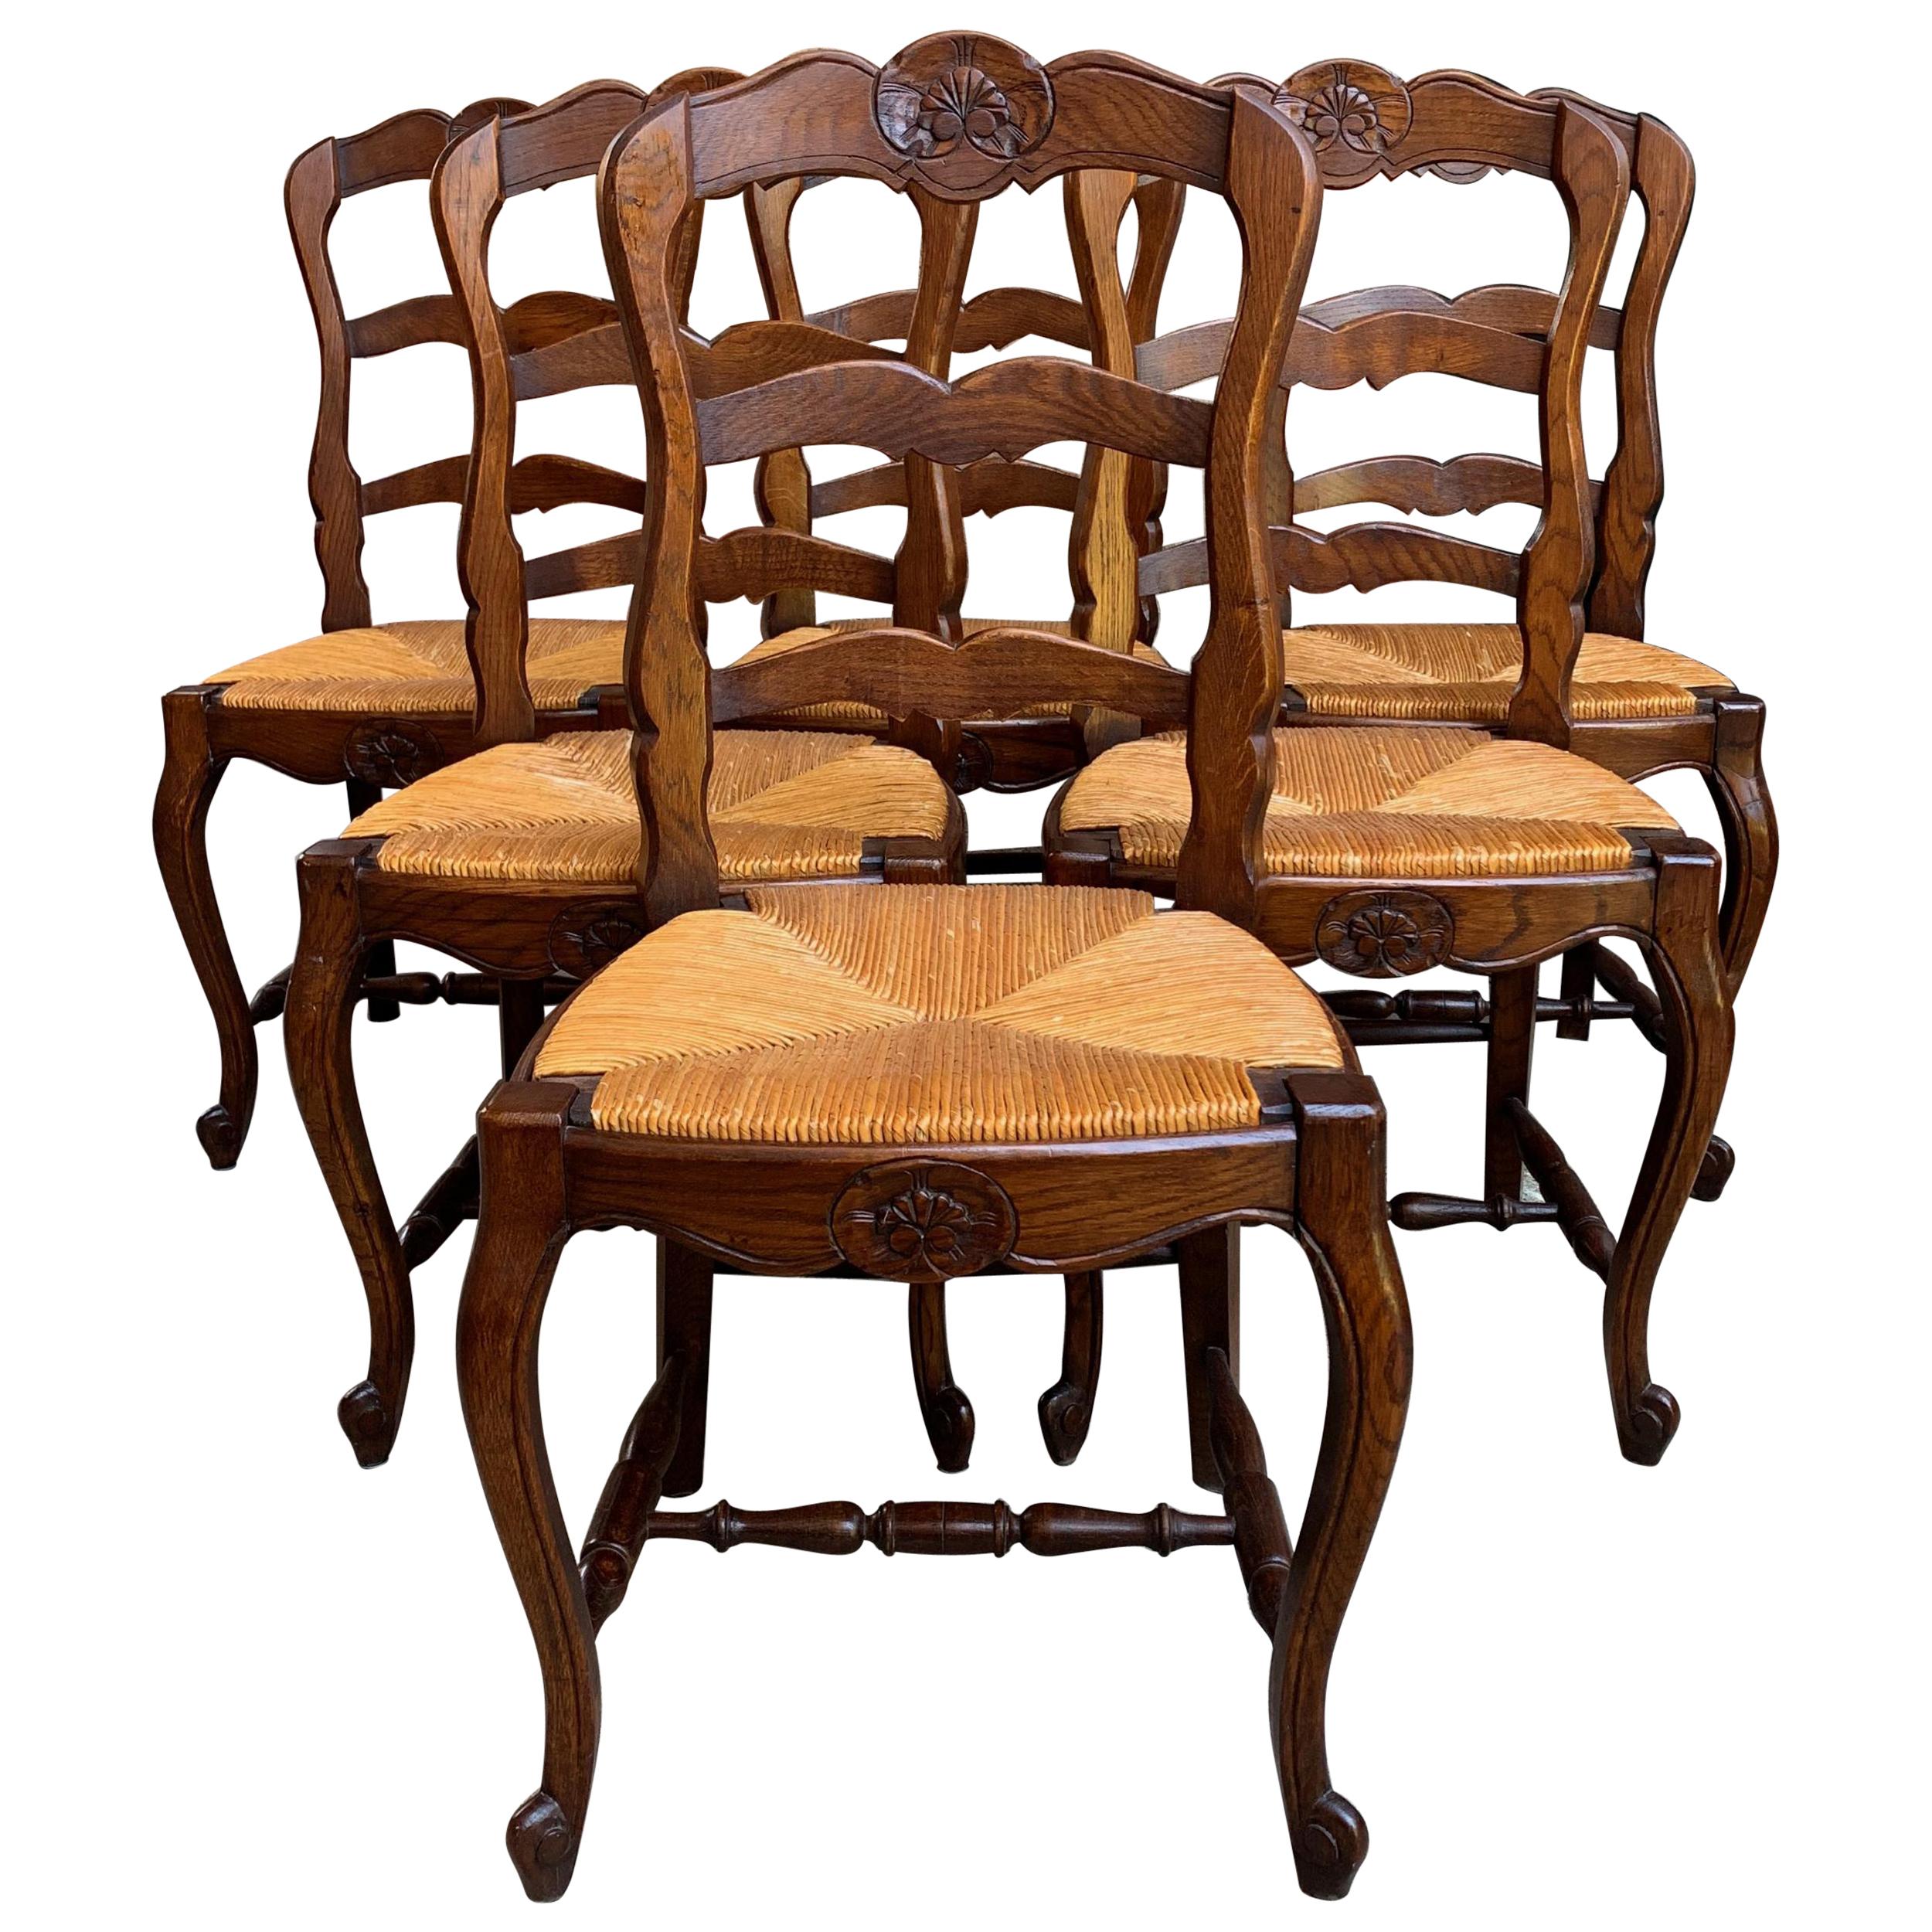 Set of 6 Antique French Country Carved Oak Ladder Back Dining Chair Rush Seat